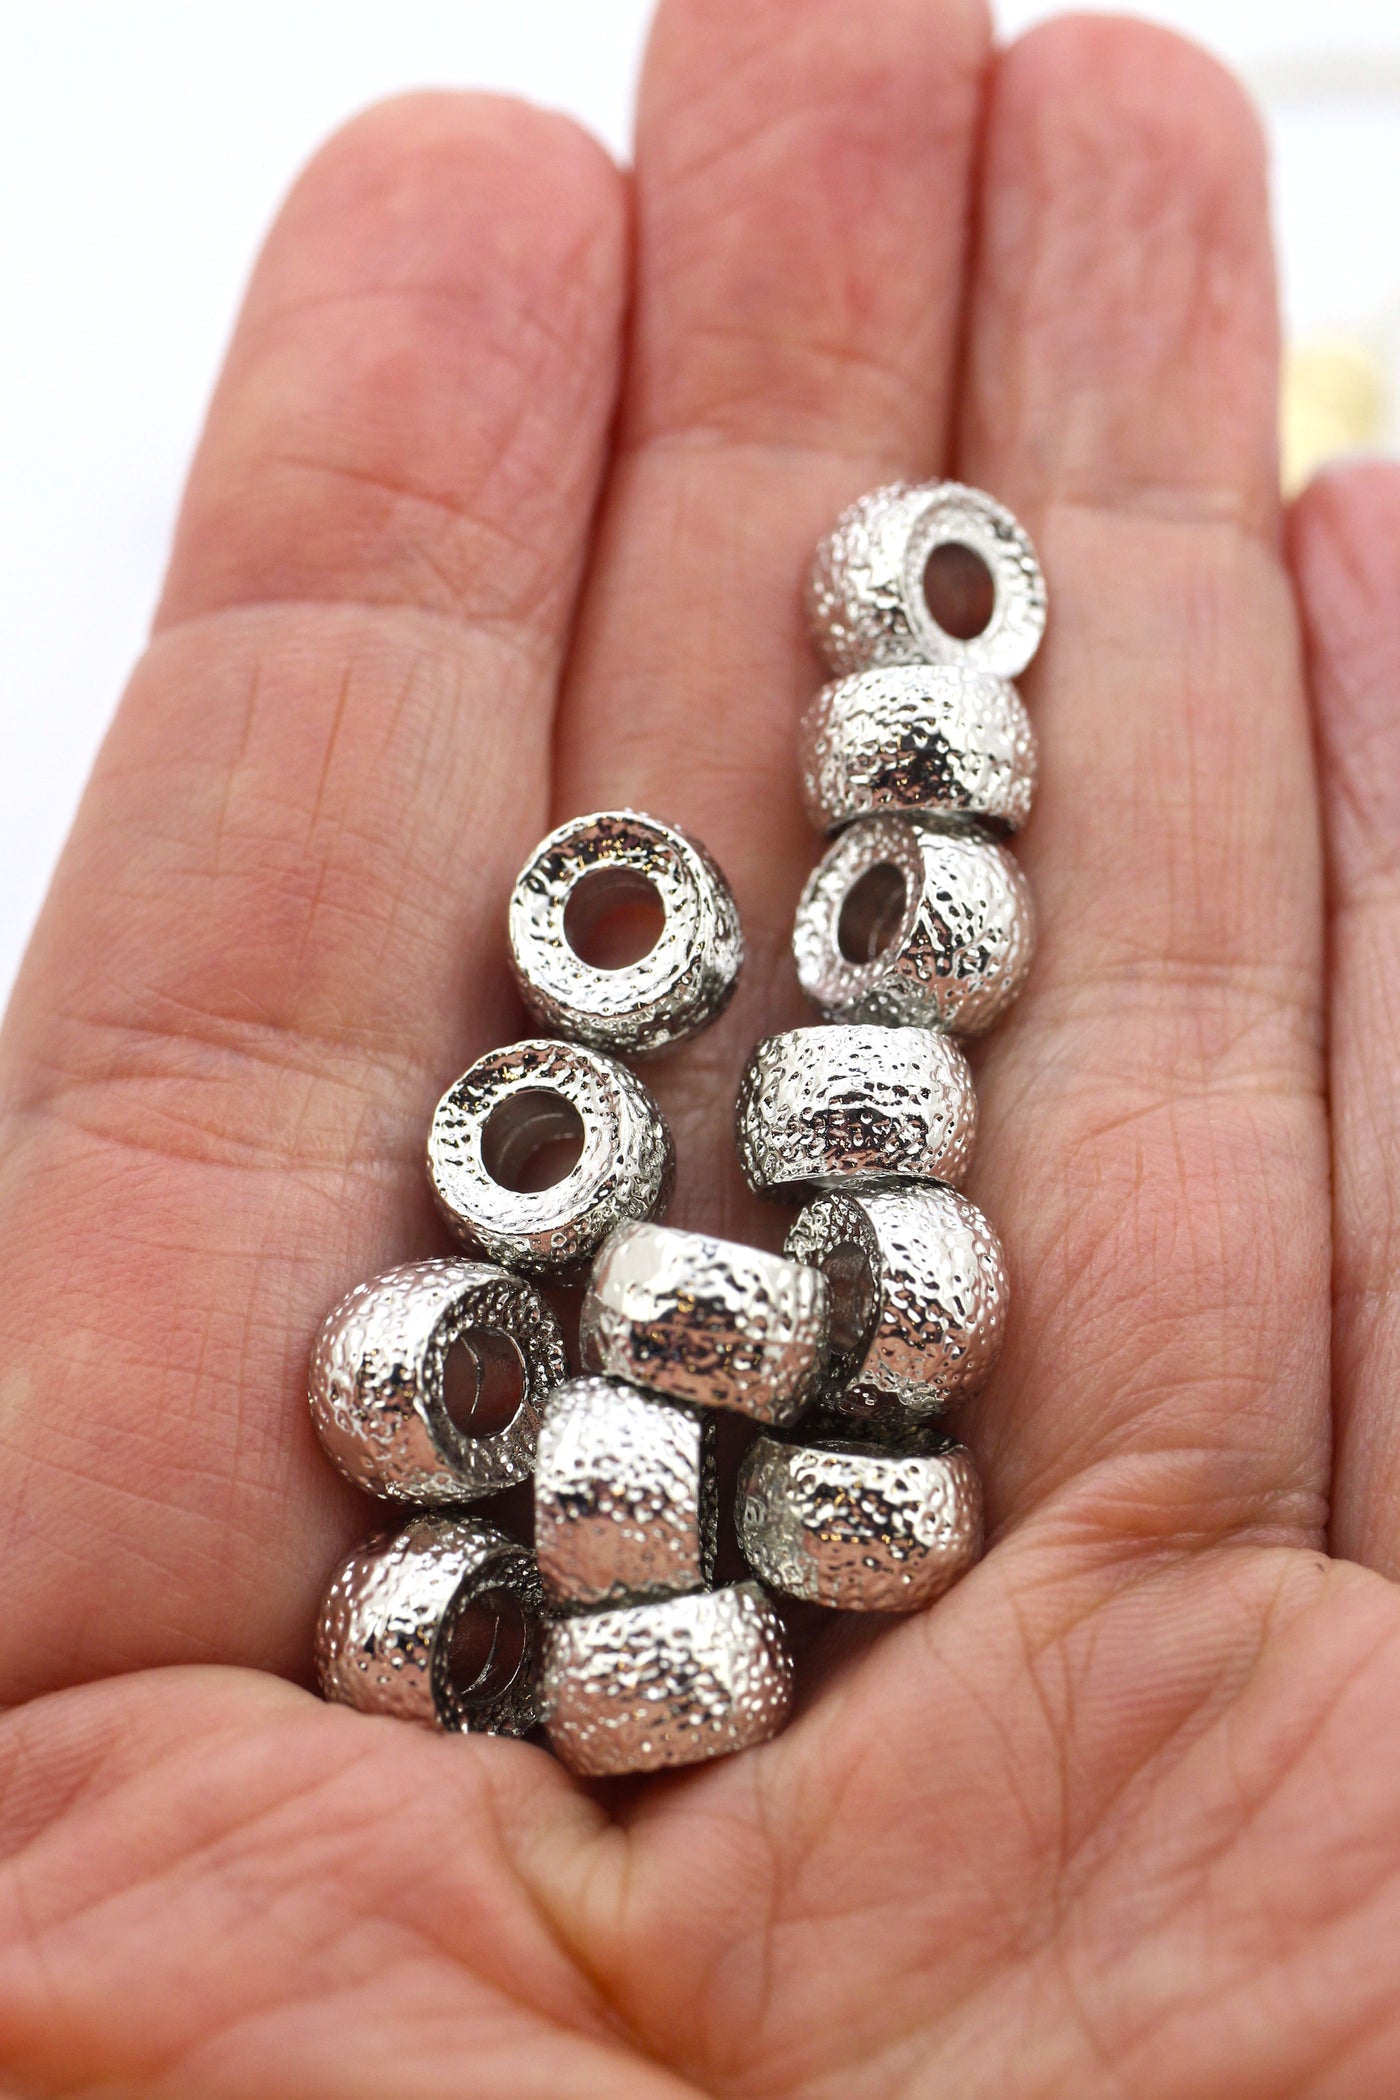 Textured Metal Pony Beads, Stardust Roller Beads, For Tie-On Bracelets & DIY Necklaces, 9x6mm, 1 bead